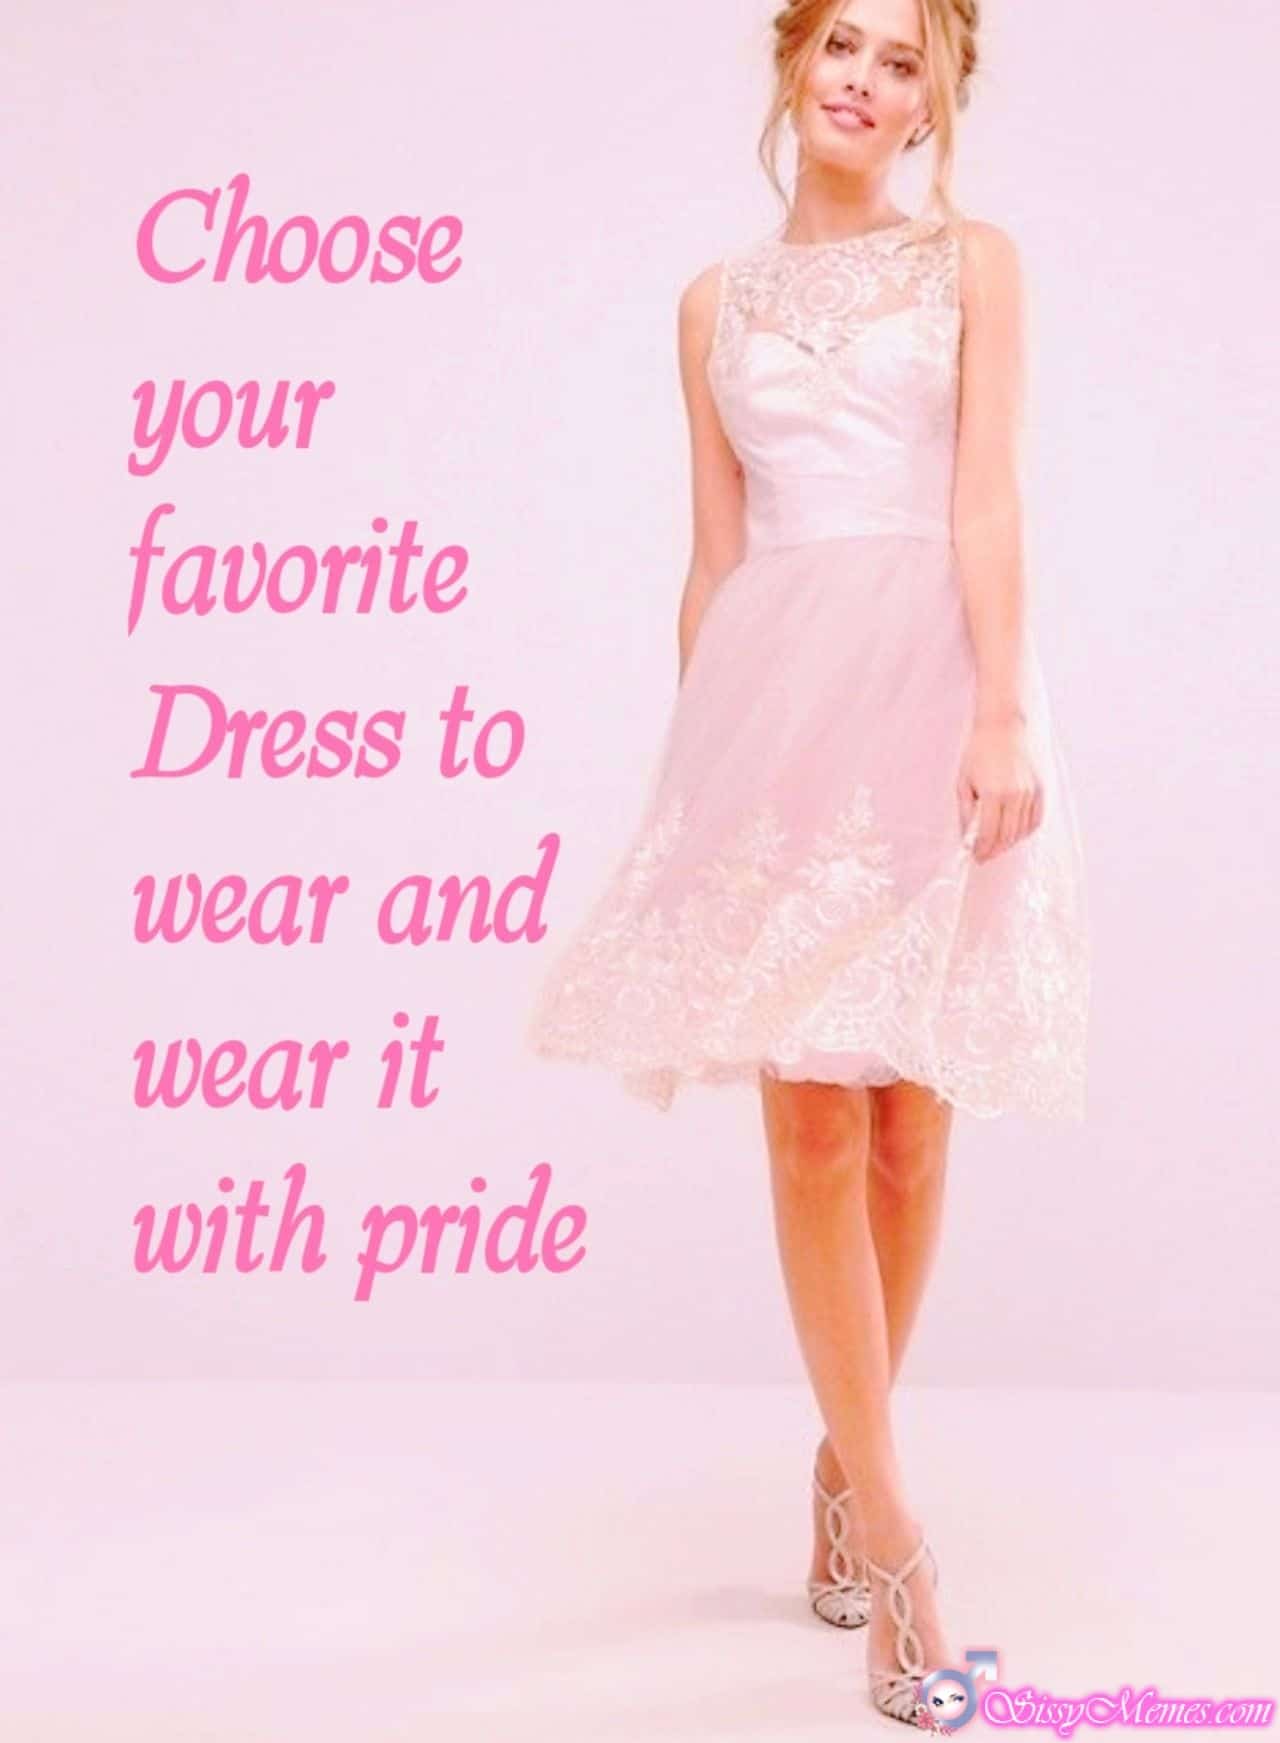 Training Hypno Feminization Femboy hotwife caption: Choose your favorite Dress to wear and wear it with pride The Most Feminine Sissytrap in the World